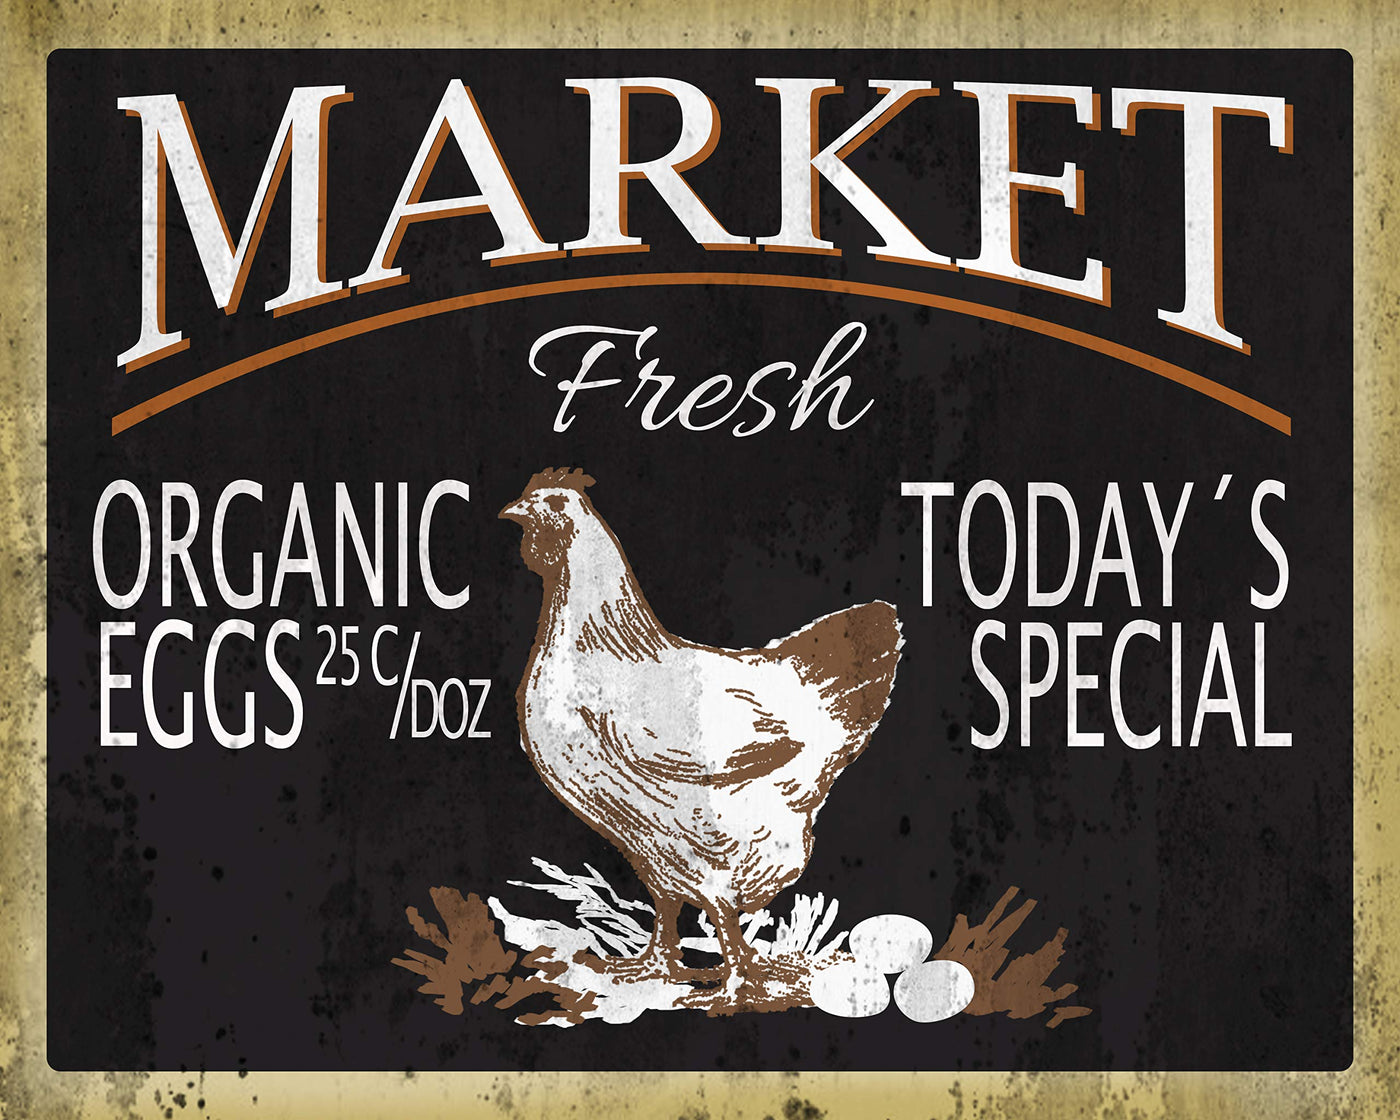 Market Fresh Organic Eggs-Vintage Farmer's Market Wall Sign -10 x 8" Rustic Hen Art Print-Ready to Frame. Retro Country Decor for Home-Kitchen-Farmhouse. Great Gift! Printed on Photo Paper.